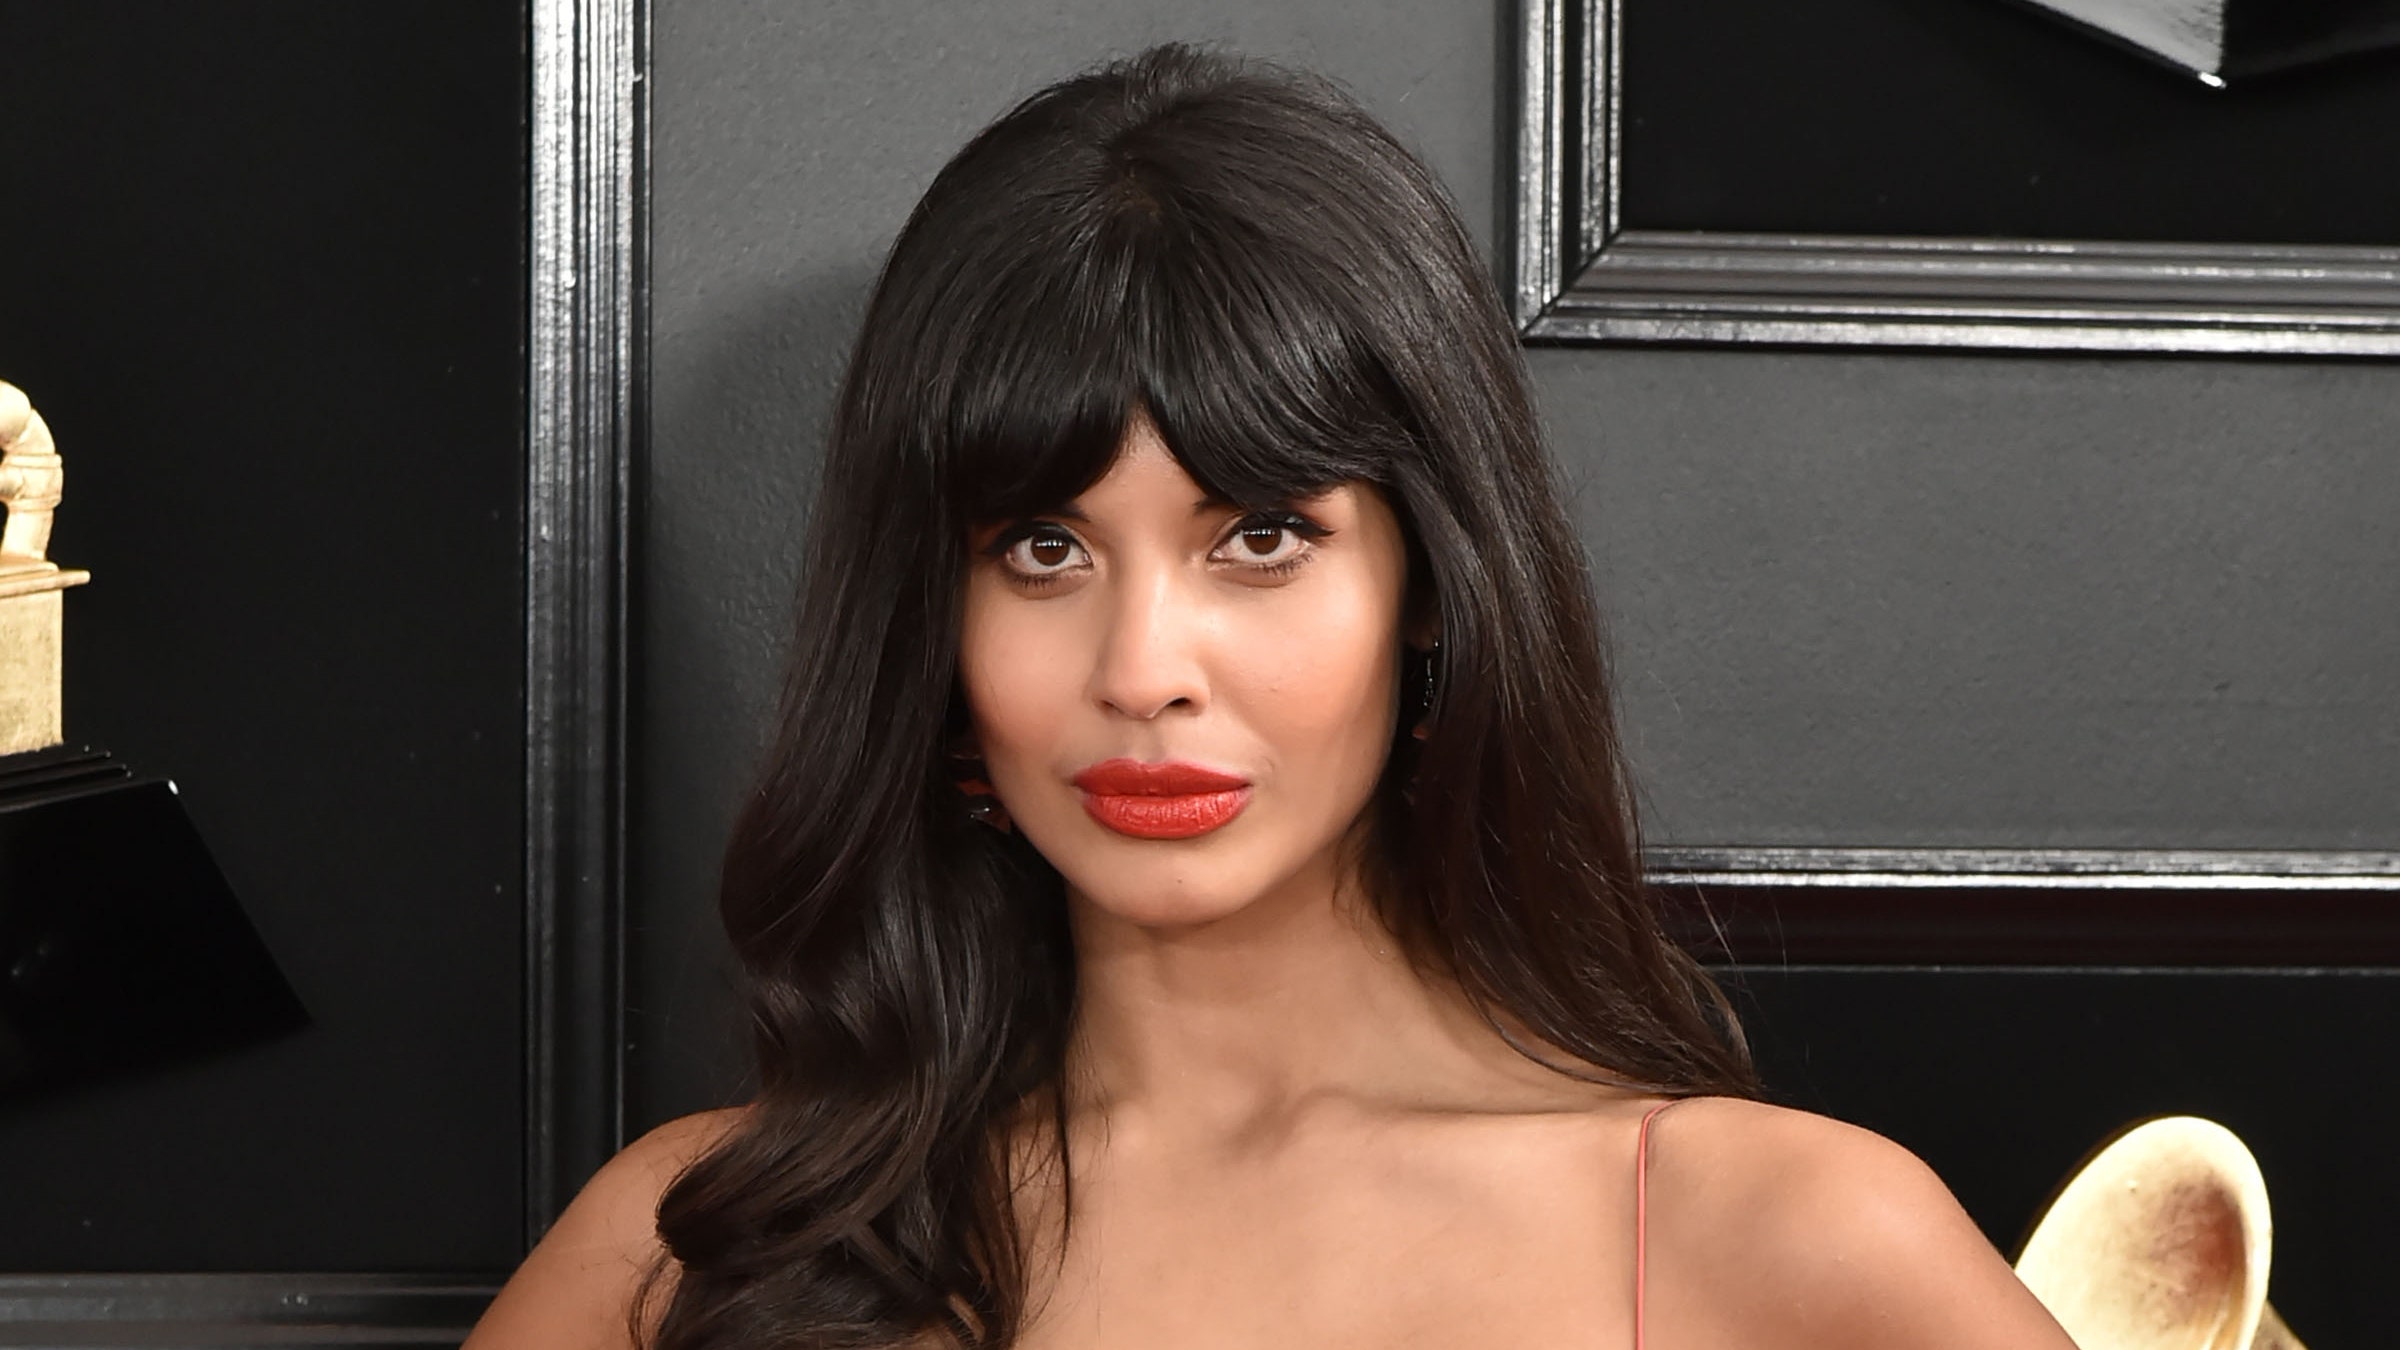 Jameela Jamil issues ‘last tweet’ after Elon Musk purchases Twitter: ‘Best of luck’